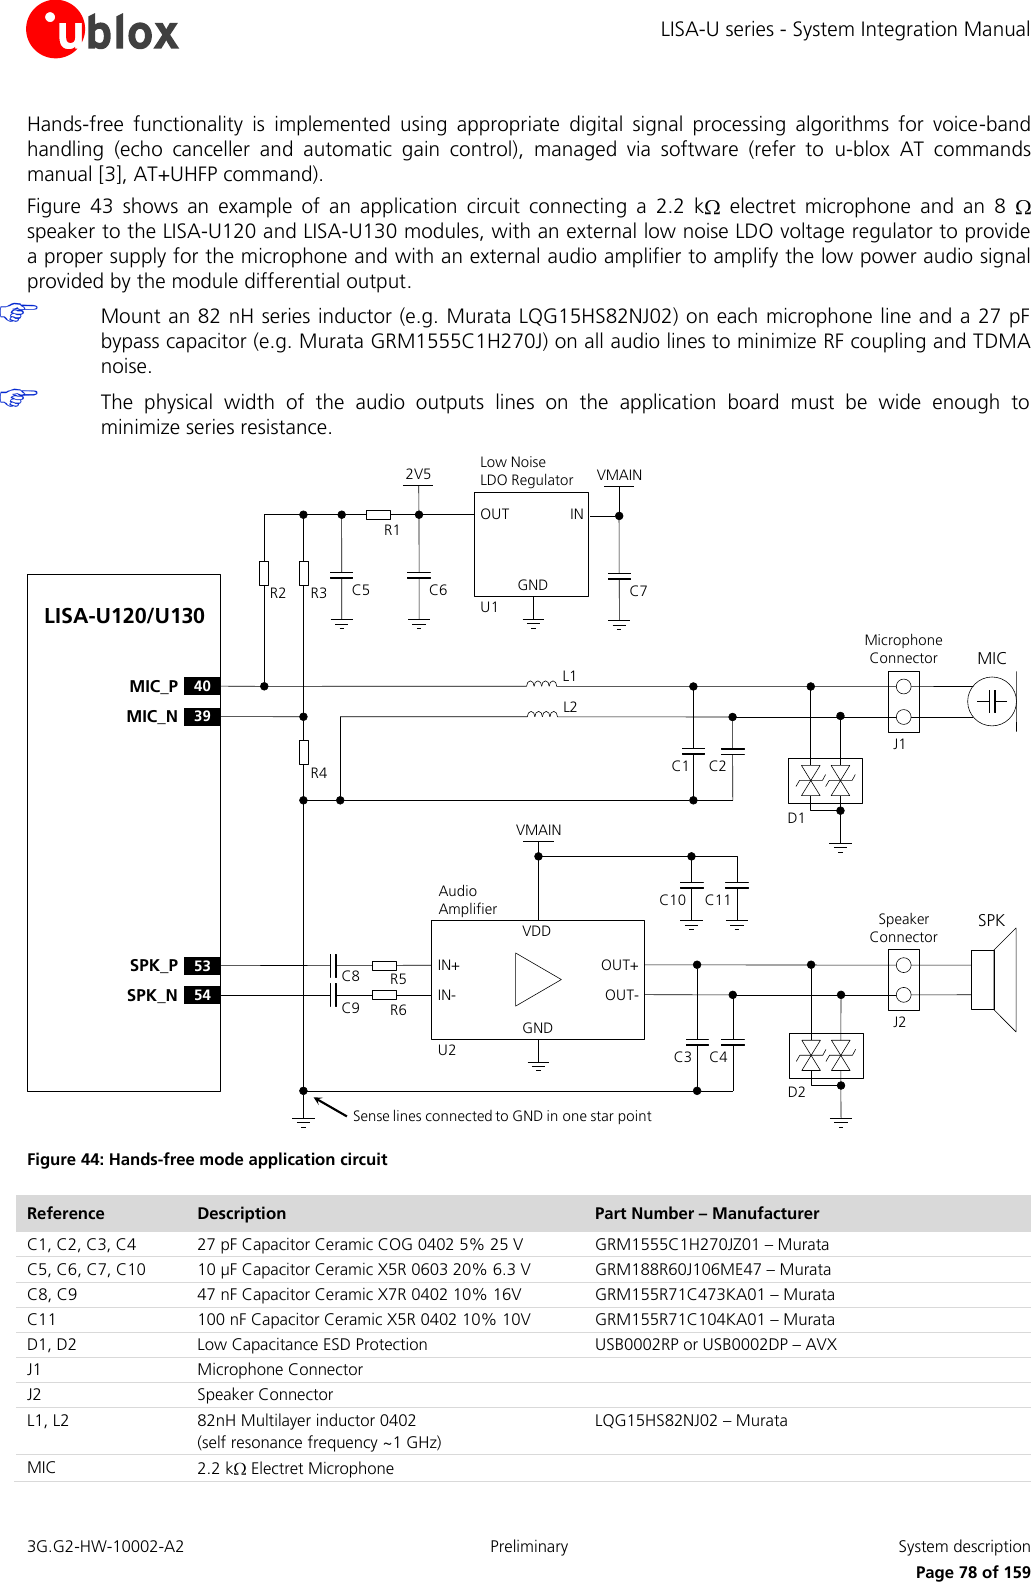 LISA-U series - System Integration Manual 3G.G2-HW-10002-A2  Preliminary  System description      Page 78 of 159 Hands-free  functionality  is  implemented  using  appropriate  digital  signal  processing  algorithms  for  voice-band handling  (echo  canceller  and  automatic  gain  control),  managed  via  software  (refer  to  u-blox AT  commands manual [3], AT+UHFP command). Figure  43  shows  an  example  of  an  application  circuit  connecting  a  2.2  k   electret  microphone  and  an 8   speaker to the LISA-U120 and LISA-U130 modules, with an external low noise LDO voltage regulator to provide a proper supply for the microphone and with an external audio amplifier to amplify the low power audio signal provided by the module differential output.  Mount an 82 nH series inductor (e.g. Murata LQG15HS82NJ02) on each microphone line and a 27 pF bypass capacitor (e.g. Murata GRM1555C1H270J) on all audio lines to minimize RF coupling and TDMA noise.  The  physical  width  of  the  audio  outputs  lines  on  the  application  board  must  be  wide  enough  to minimize series resistance. C1 C2C3L139MIC_N53SPK_P40MIC_P54SPK_ND1Microphone ConnectorD2INOUTGNDLow Noise LDO RegulatorU1R4R1C6R3R2 C52V5Sense lines connected to GND in one star pointC4SPKL2MICSpeaker ConnectorOUT+IN+GNDVMAINU2OUT-IN-C8C9R5R6VDDC11C10LISA-U120/U130Audio AmplifierJ1J2VMAINC7 Figure 44: Hands-free mode application circuit Reference Description Part Number – Manufacturer C1, C2, C3, C4 27 pF Capacitor Ceramic COG 0402 5% 25 V  GRM1555C1H270JZ01 – Murata C5, C6, C7, C10 10 µF Capacitor Ceramic X5R 0603 20% 6.3 V GRM188R60J106ME47 – Murata C8, C9 47 nF Capacitor Ceramic X7R 0402 10% 16V GRM155R71C473KA01 – Murata C11 100 nF Capacitor Ceramic X5R 0402 10% 10V GRM155R71C104KA01 – Murata D1, D2 Low Capacitance ESD Protection USB0002RP or USB0002DP – AVX J1 Microphone Connector  J2 Speaker Connector  L1, L2 82nH Multilayer inductor 0402 (self resonance frequency ~1 GHz) LQG15HS82NJ02 – Murata MIC 2.2 k  Electret Microphone  